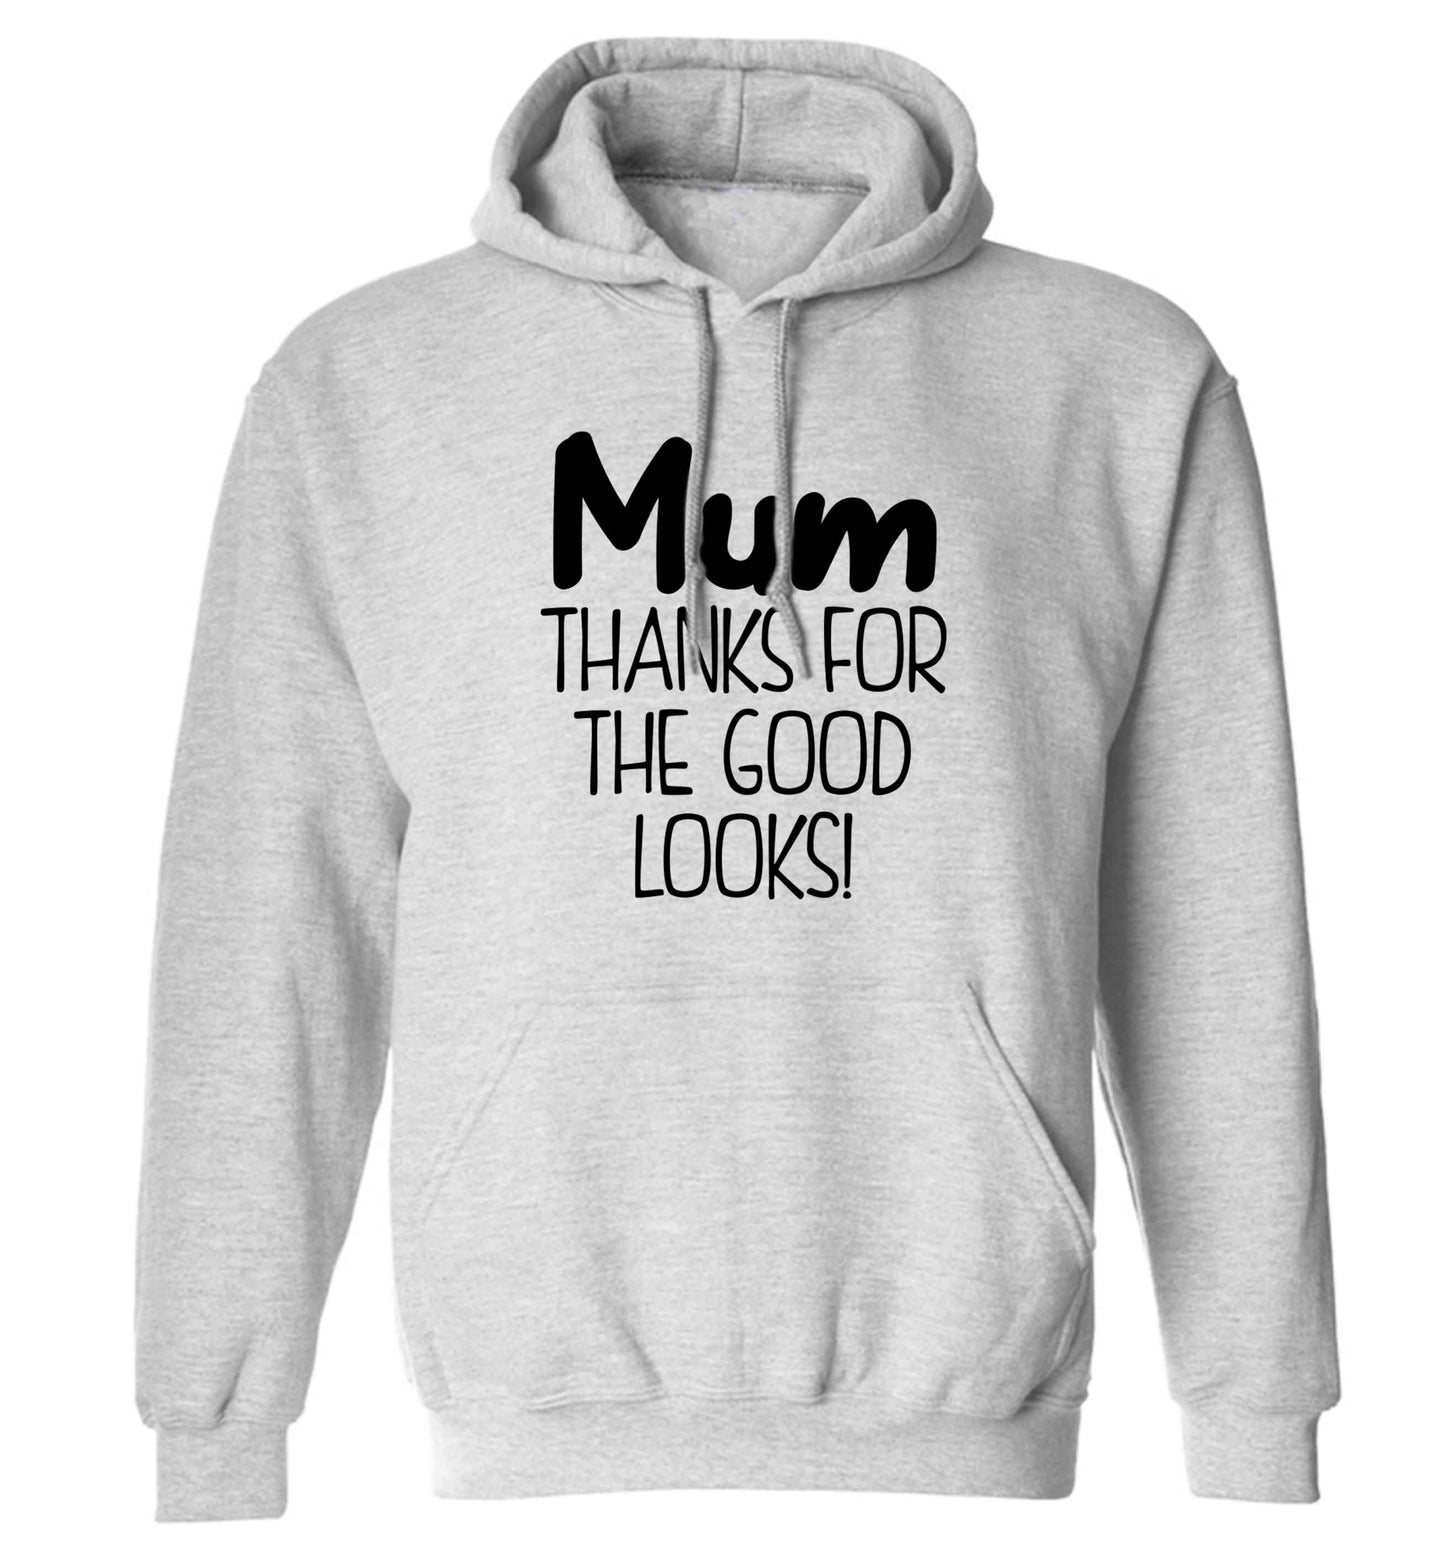 Mum thanks for the good looks! adults unisex grey hoodie 2XL